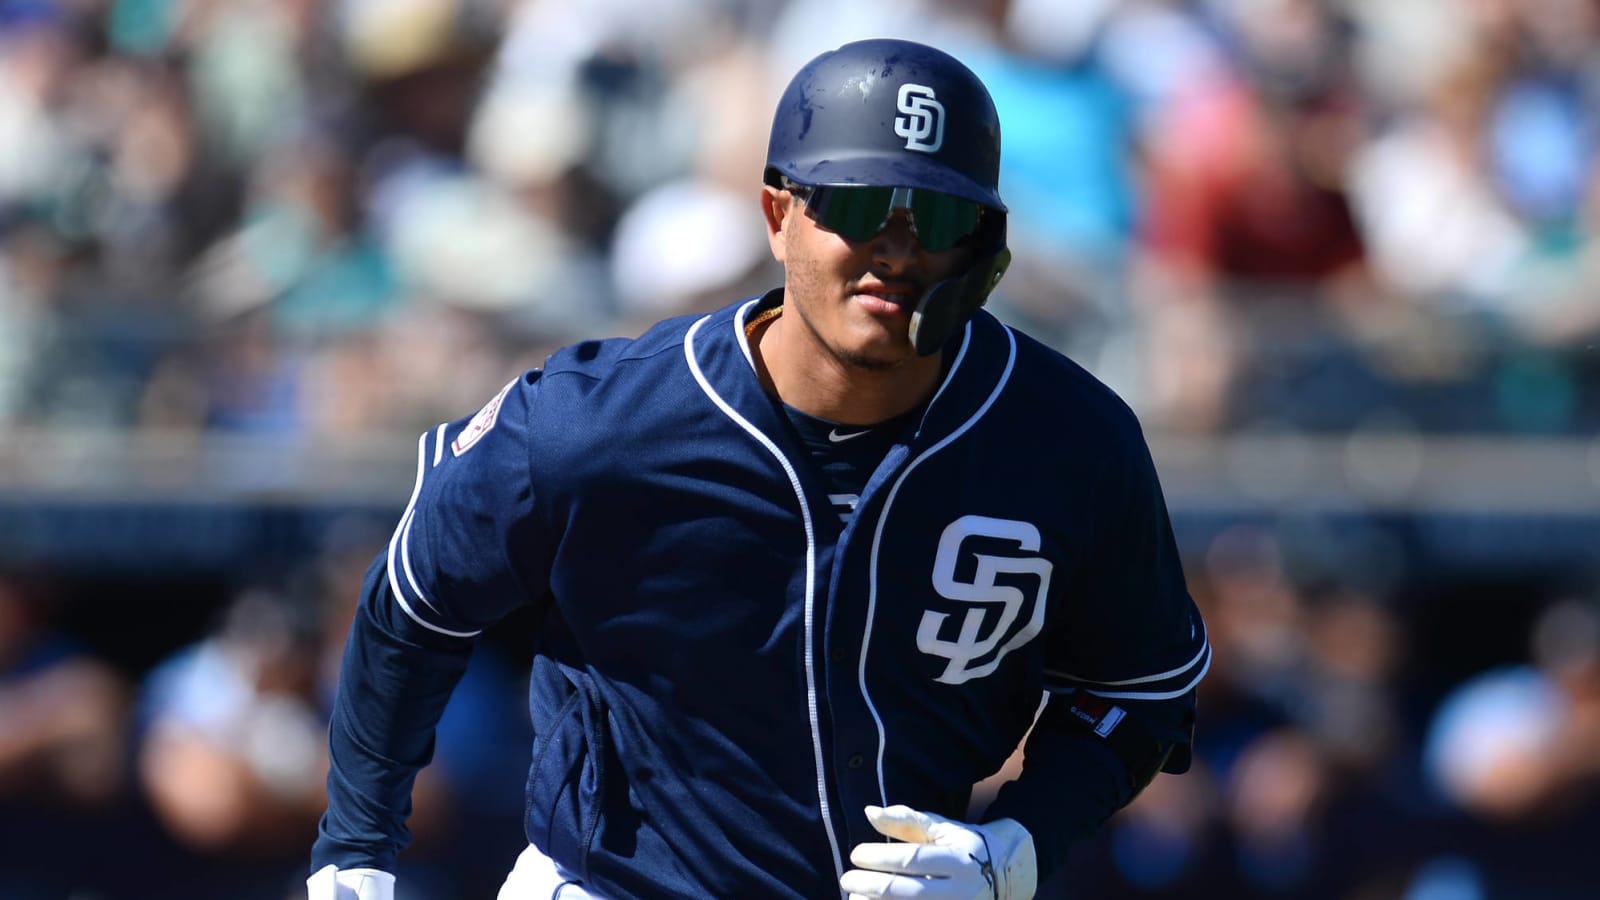 Manny Machado has met expectations for Padres